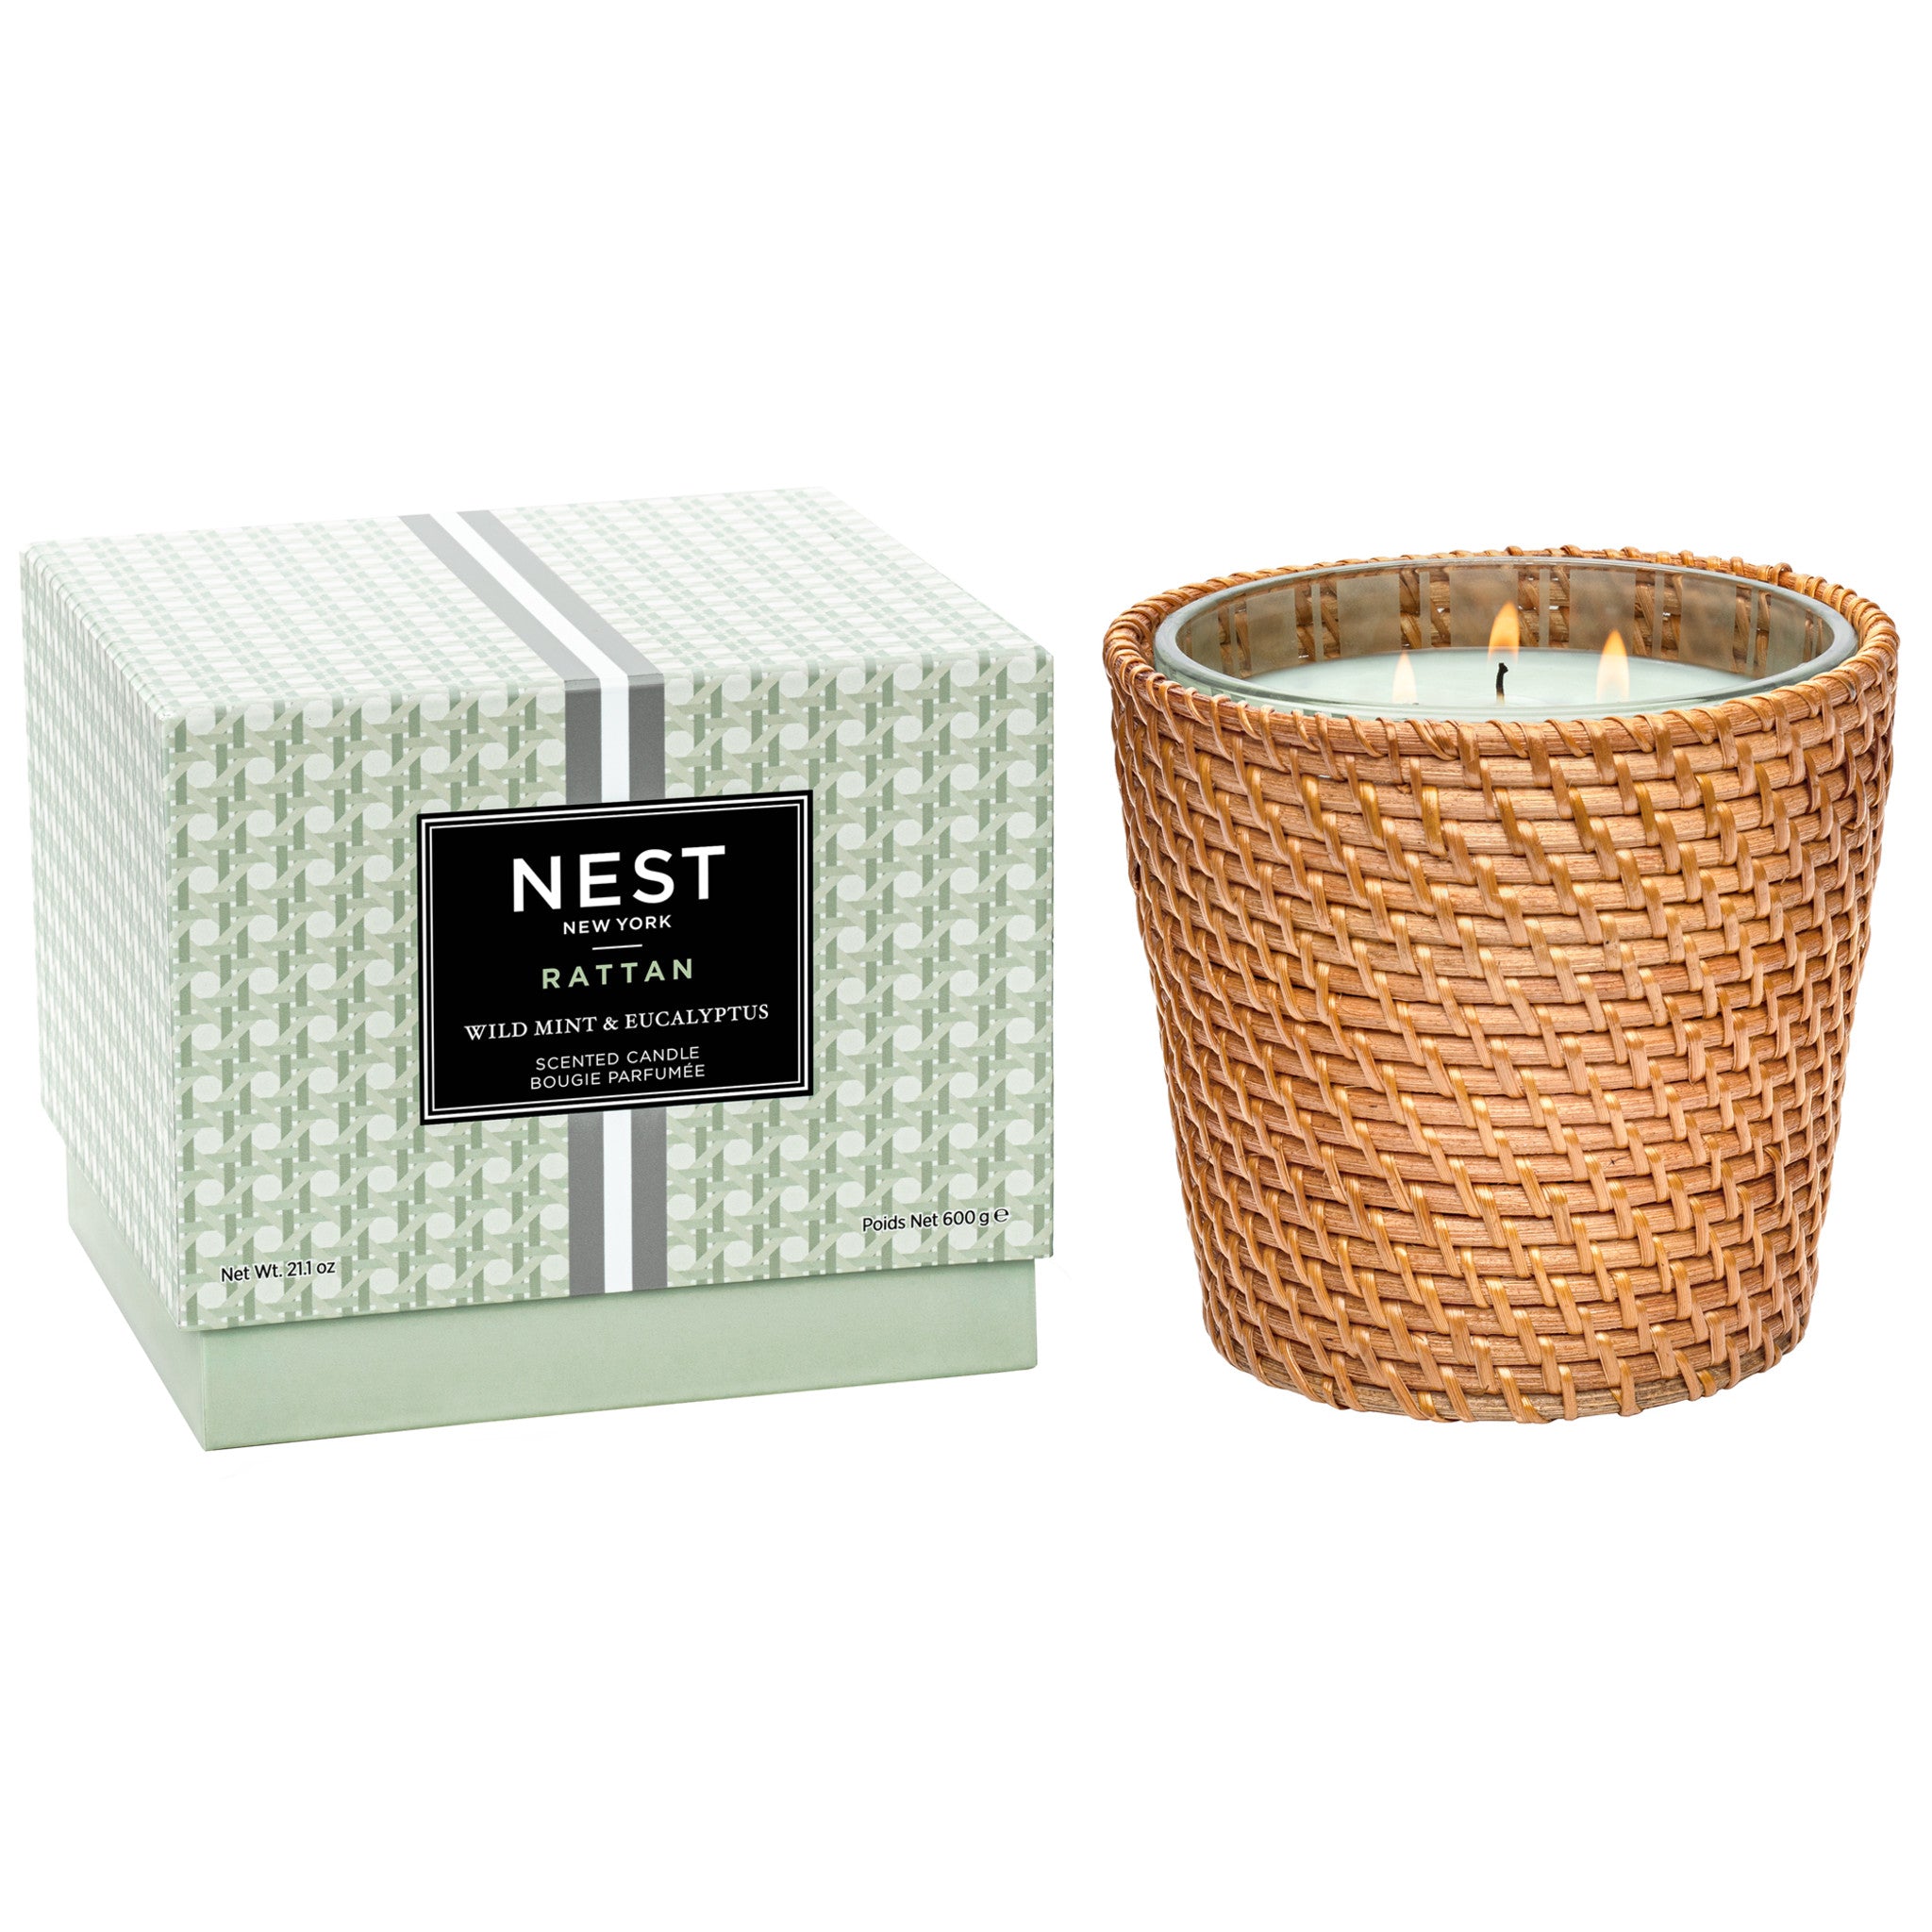 Limited edition Nest Rattan Wild Mint and Eucalyptus (Limited Edition) Size variant: 21.1 oz main image.